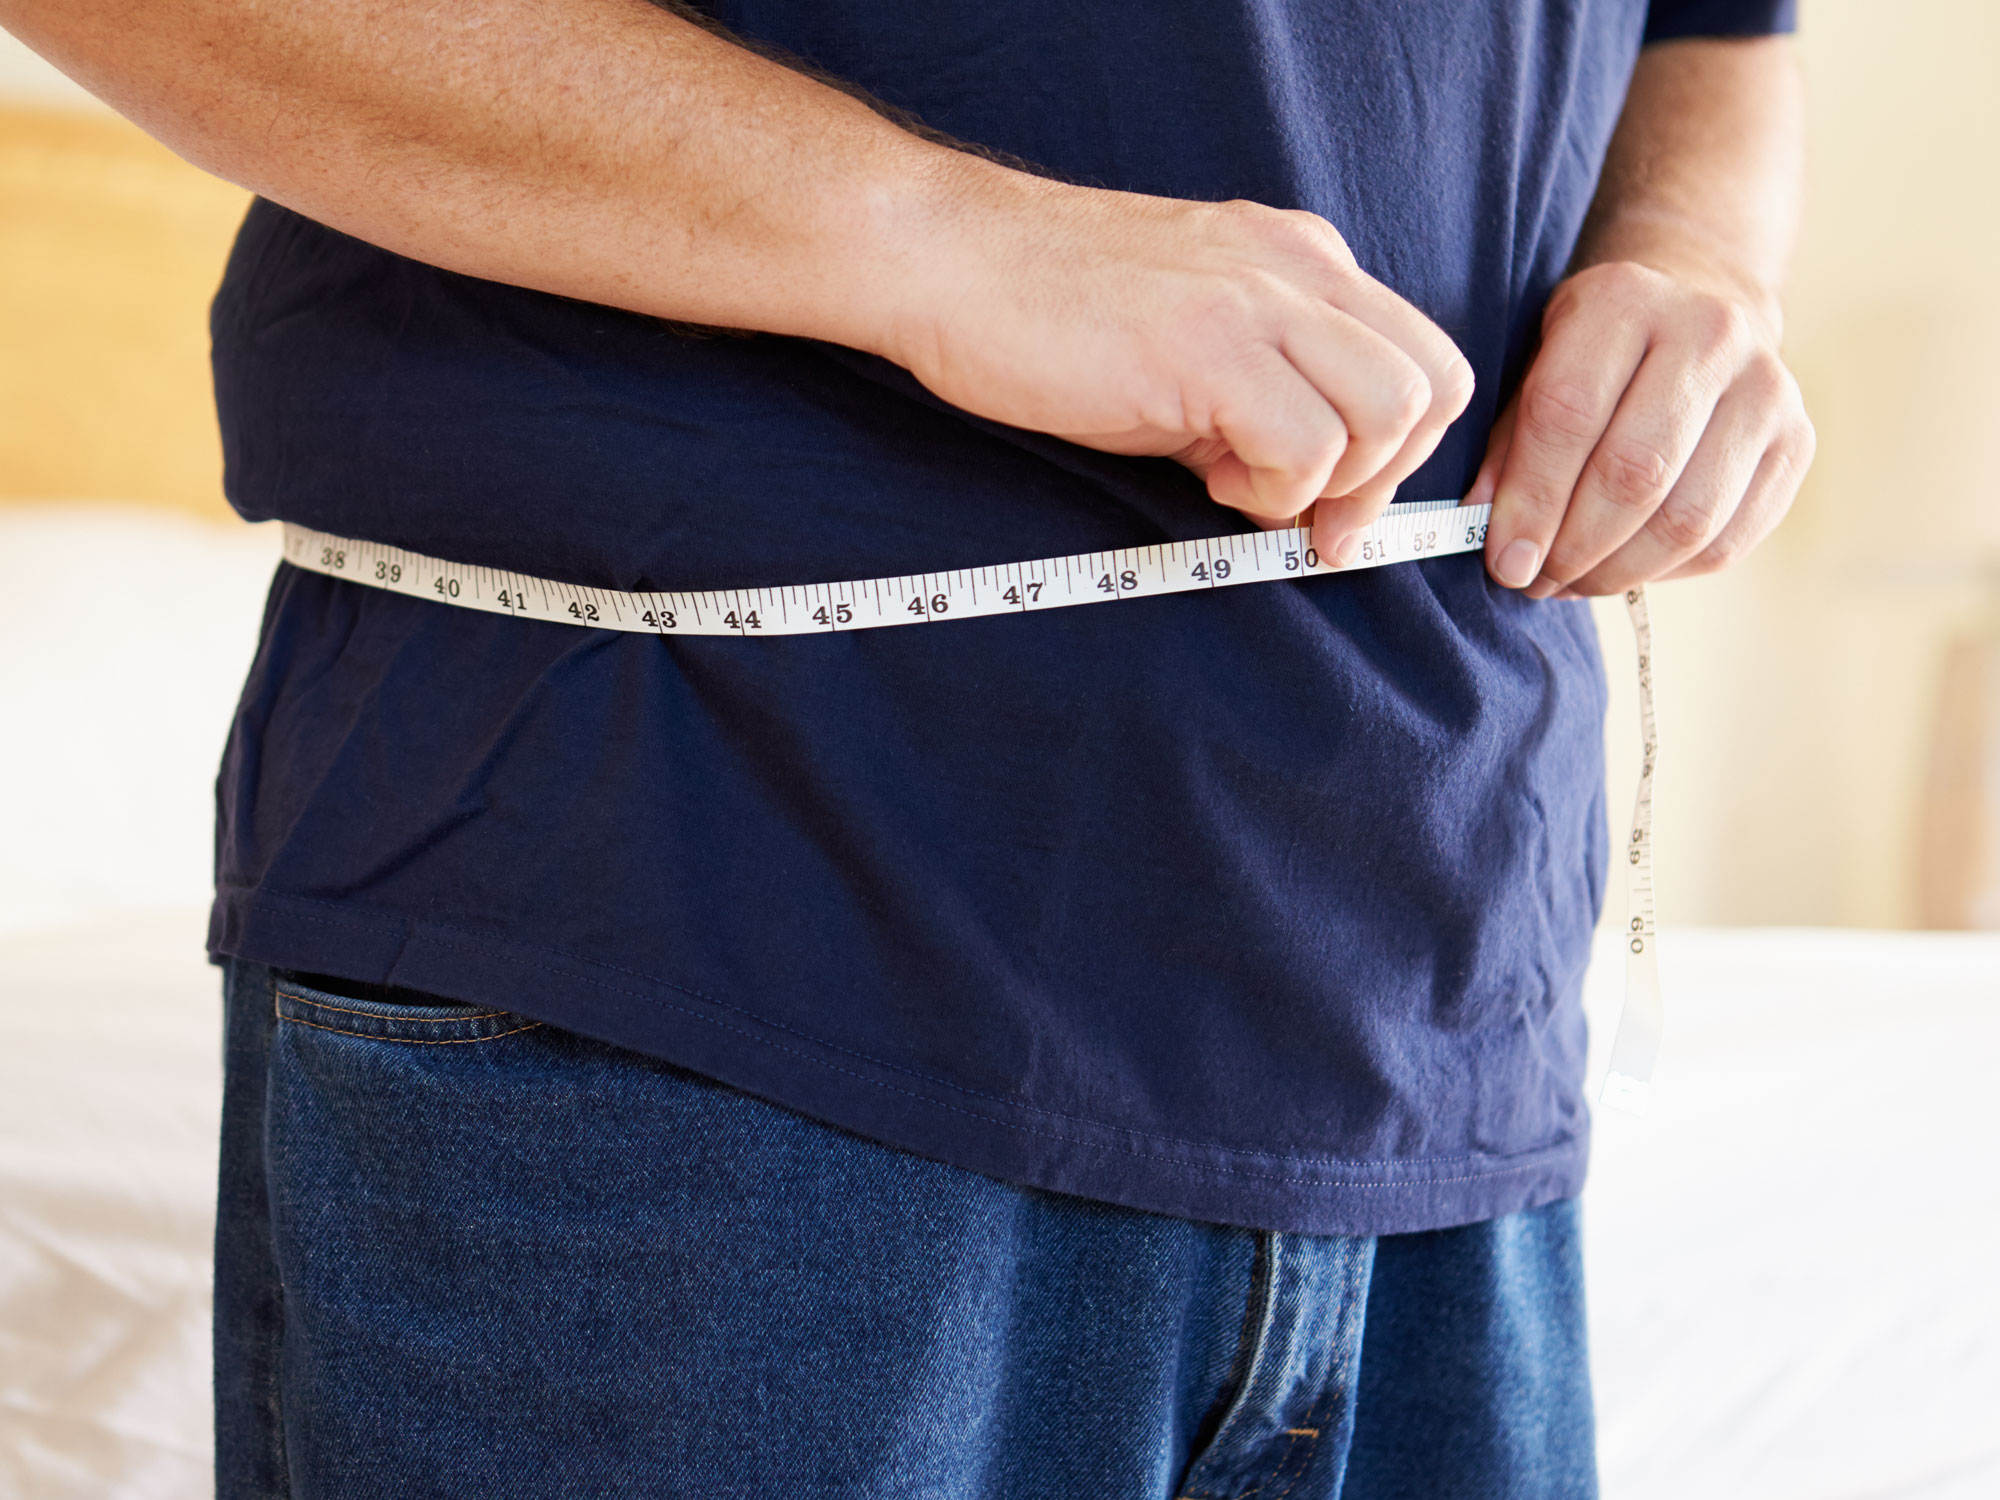 This proven weight loss habit takes less time than you think